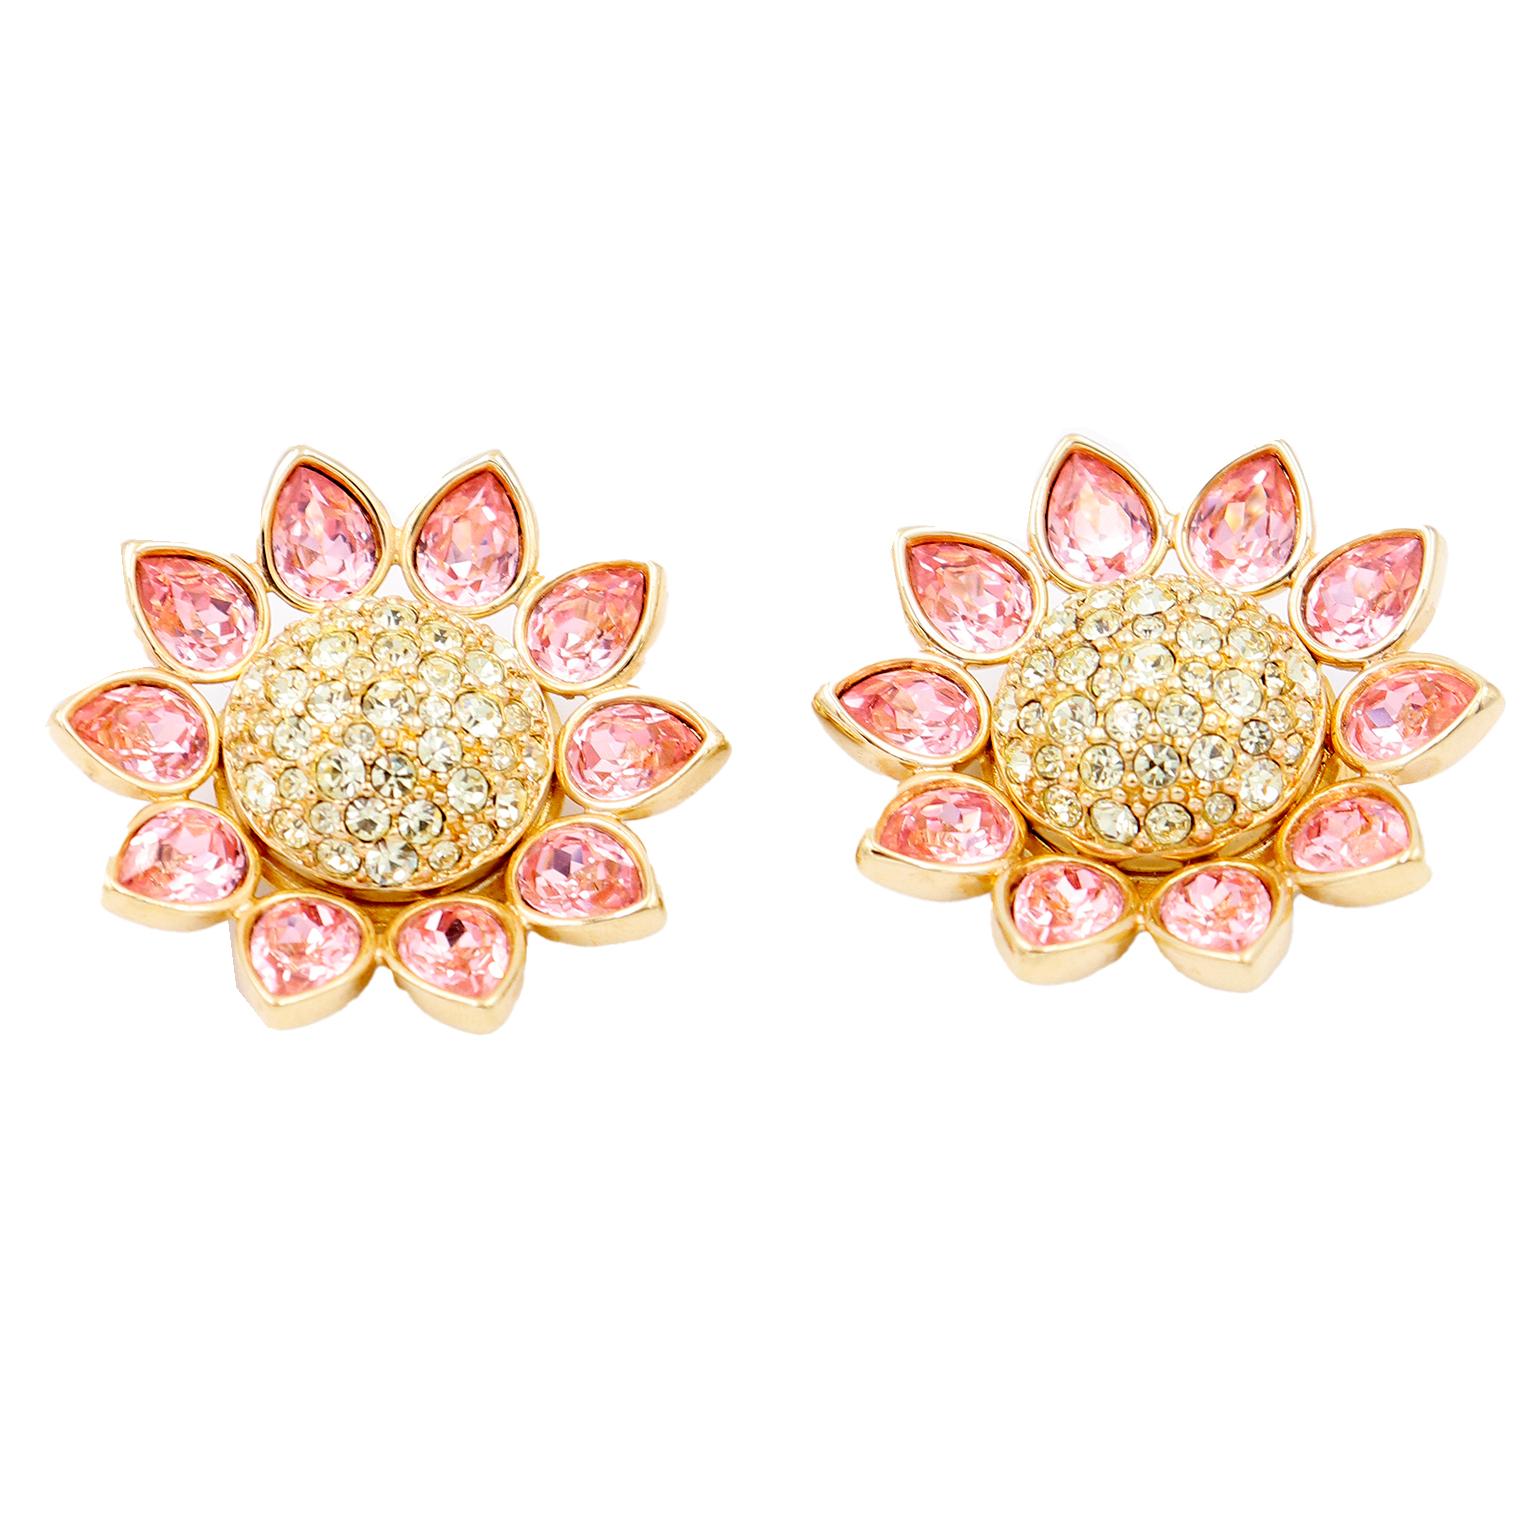 1990s Swarovski Crystal Gold Plated Pink Yellow Flower Brooch & Earrings In Excellent Condition For Sale In Portland, OR